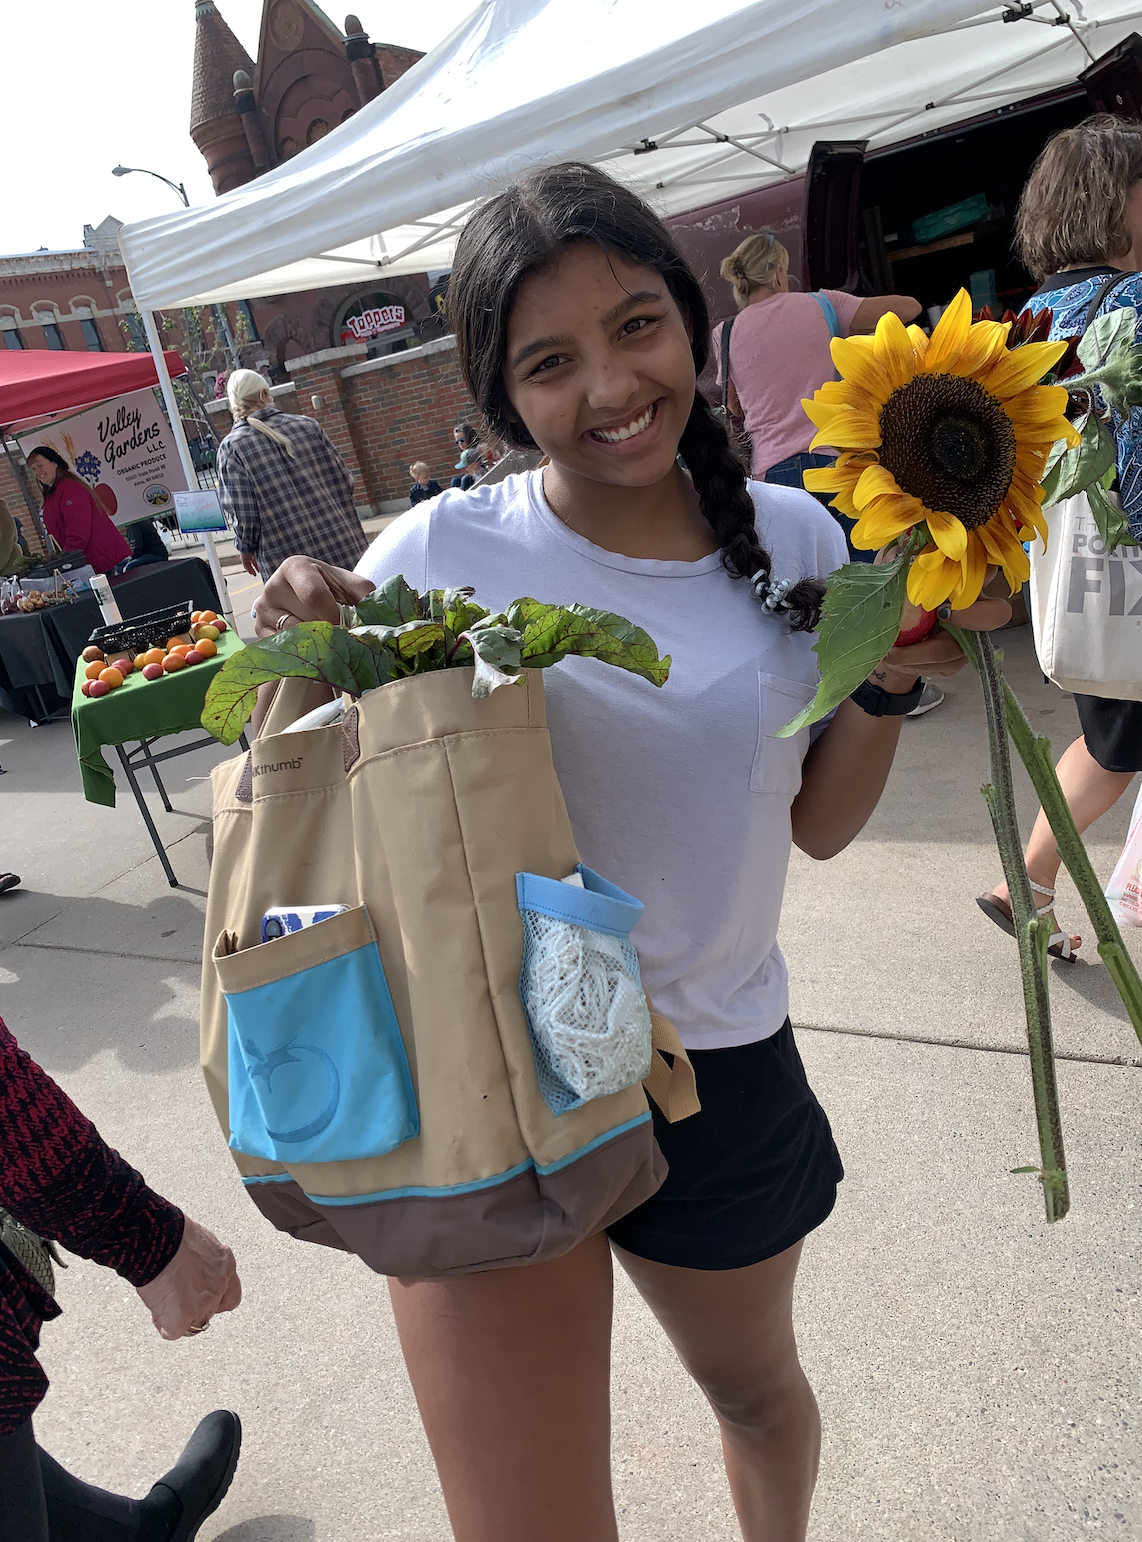 A picture of a woman in a white t-shirt smiling holding a bag of vegetables and a sunflower.